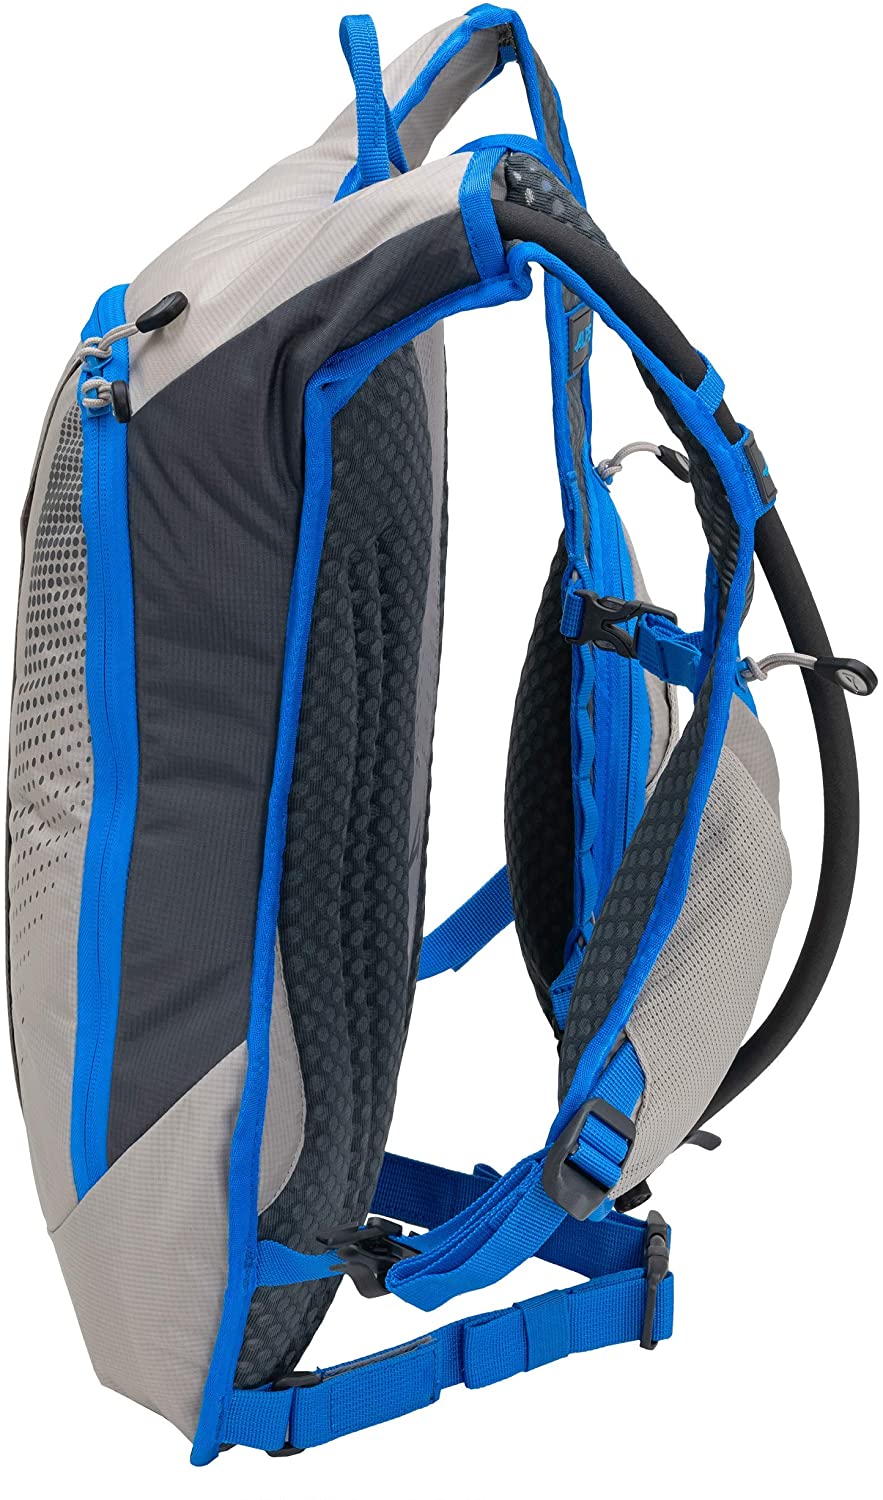 ALPS Mountaineering Hydro Trail Day Backpack 10L, Gray/Blue - AL6021033